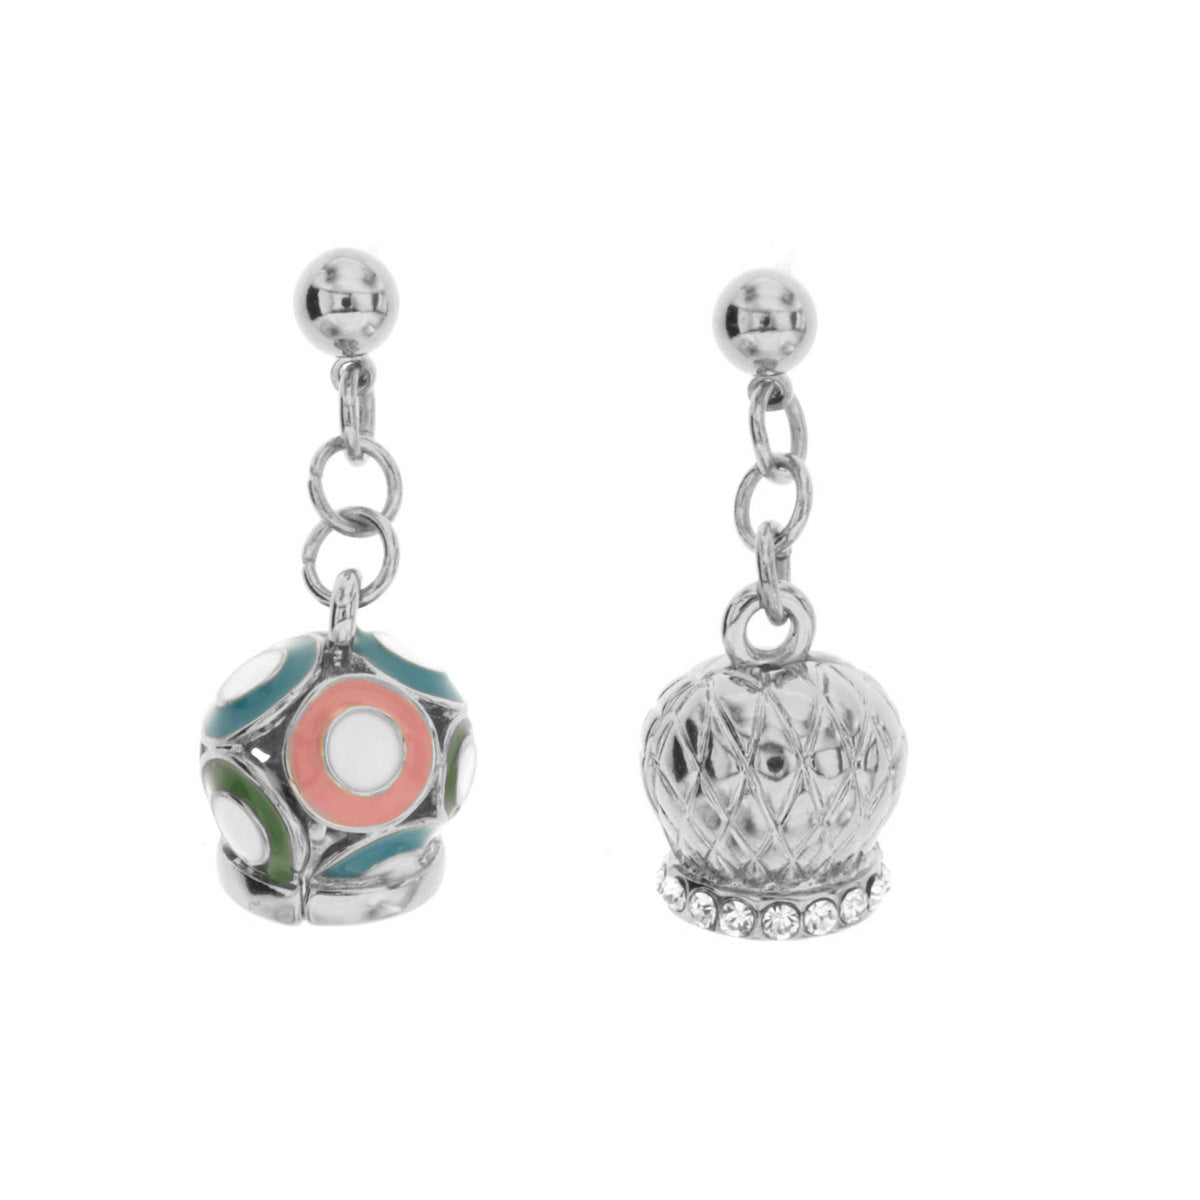 Metal earrings with pendant glazed bells, embellished with crystals